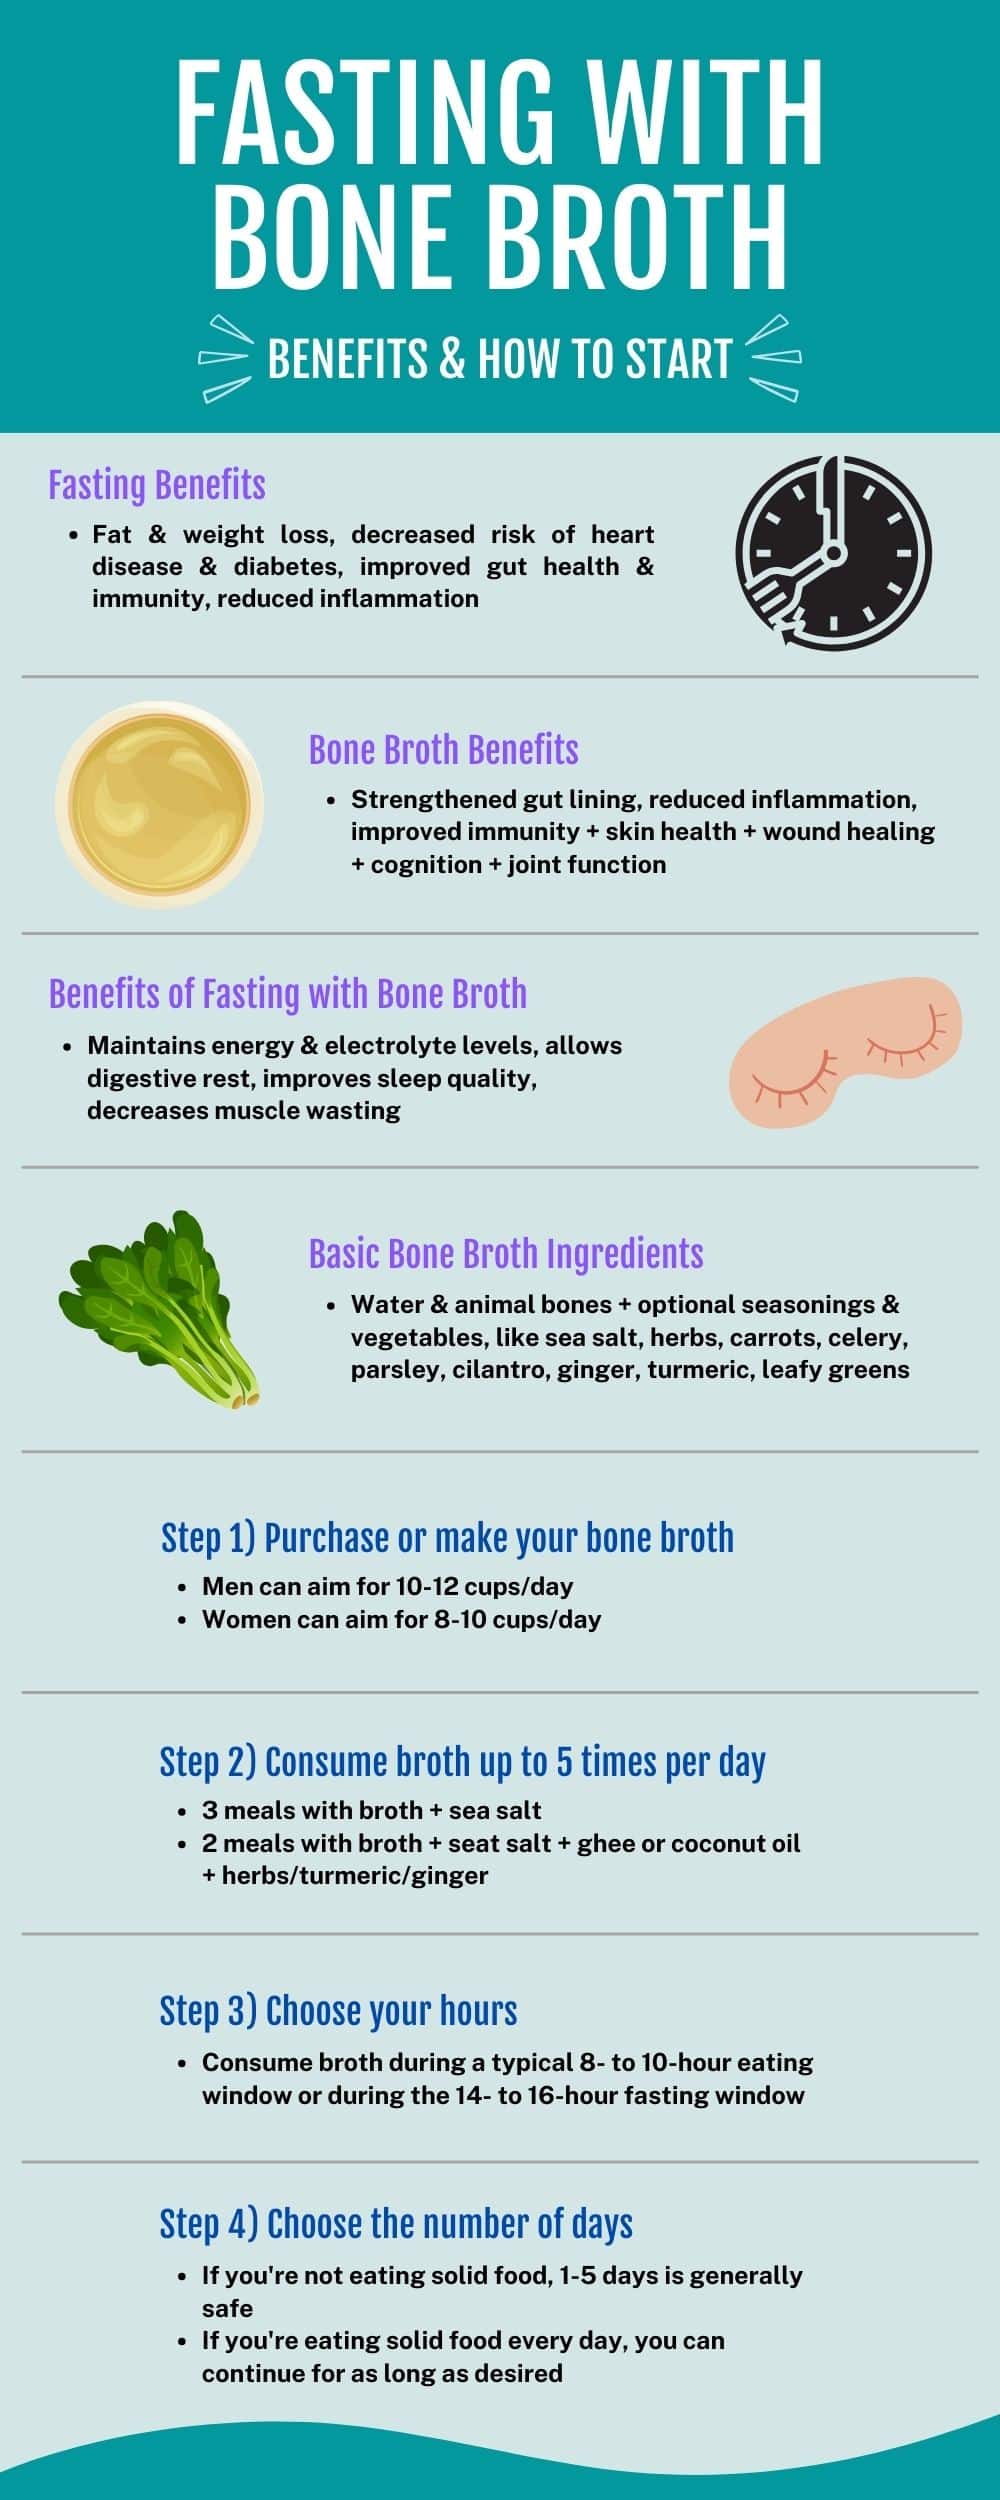 Infographic for fasting with bone broth. Review of fasting benefits, bone broth benefits, and steps for starting a bone broth fast.